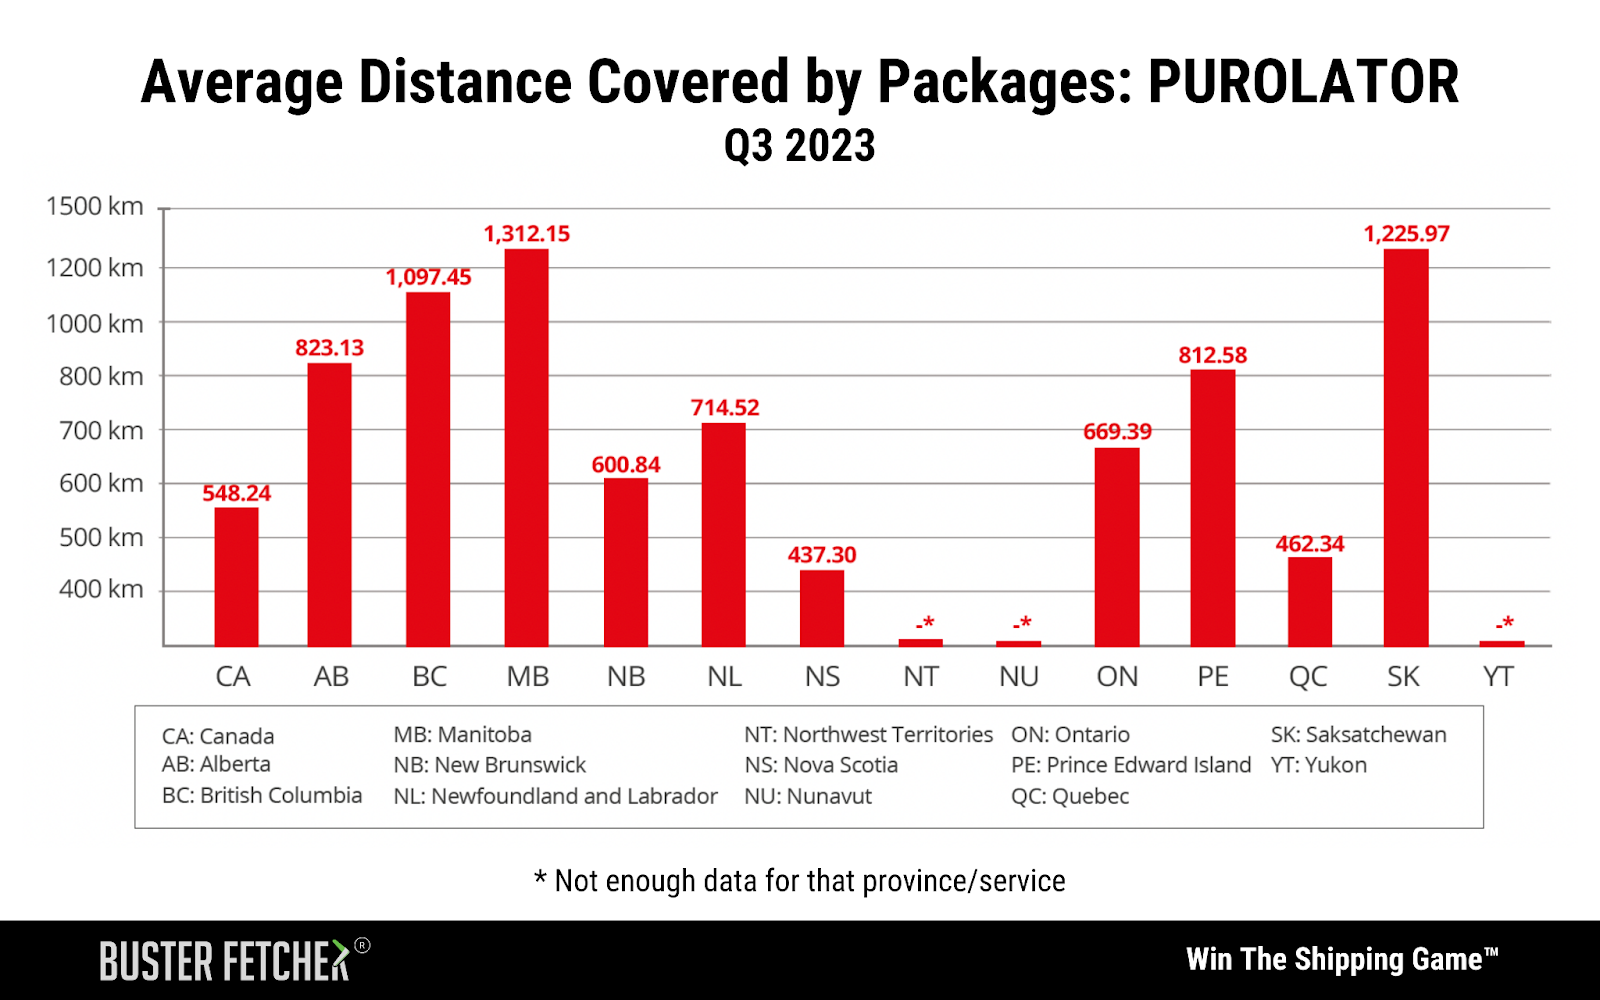 Average distande covered by packages from Purolator 2023